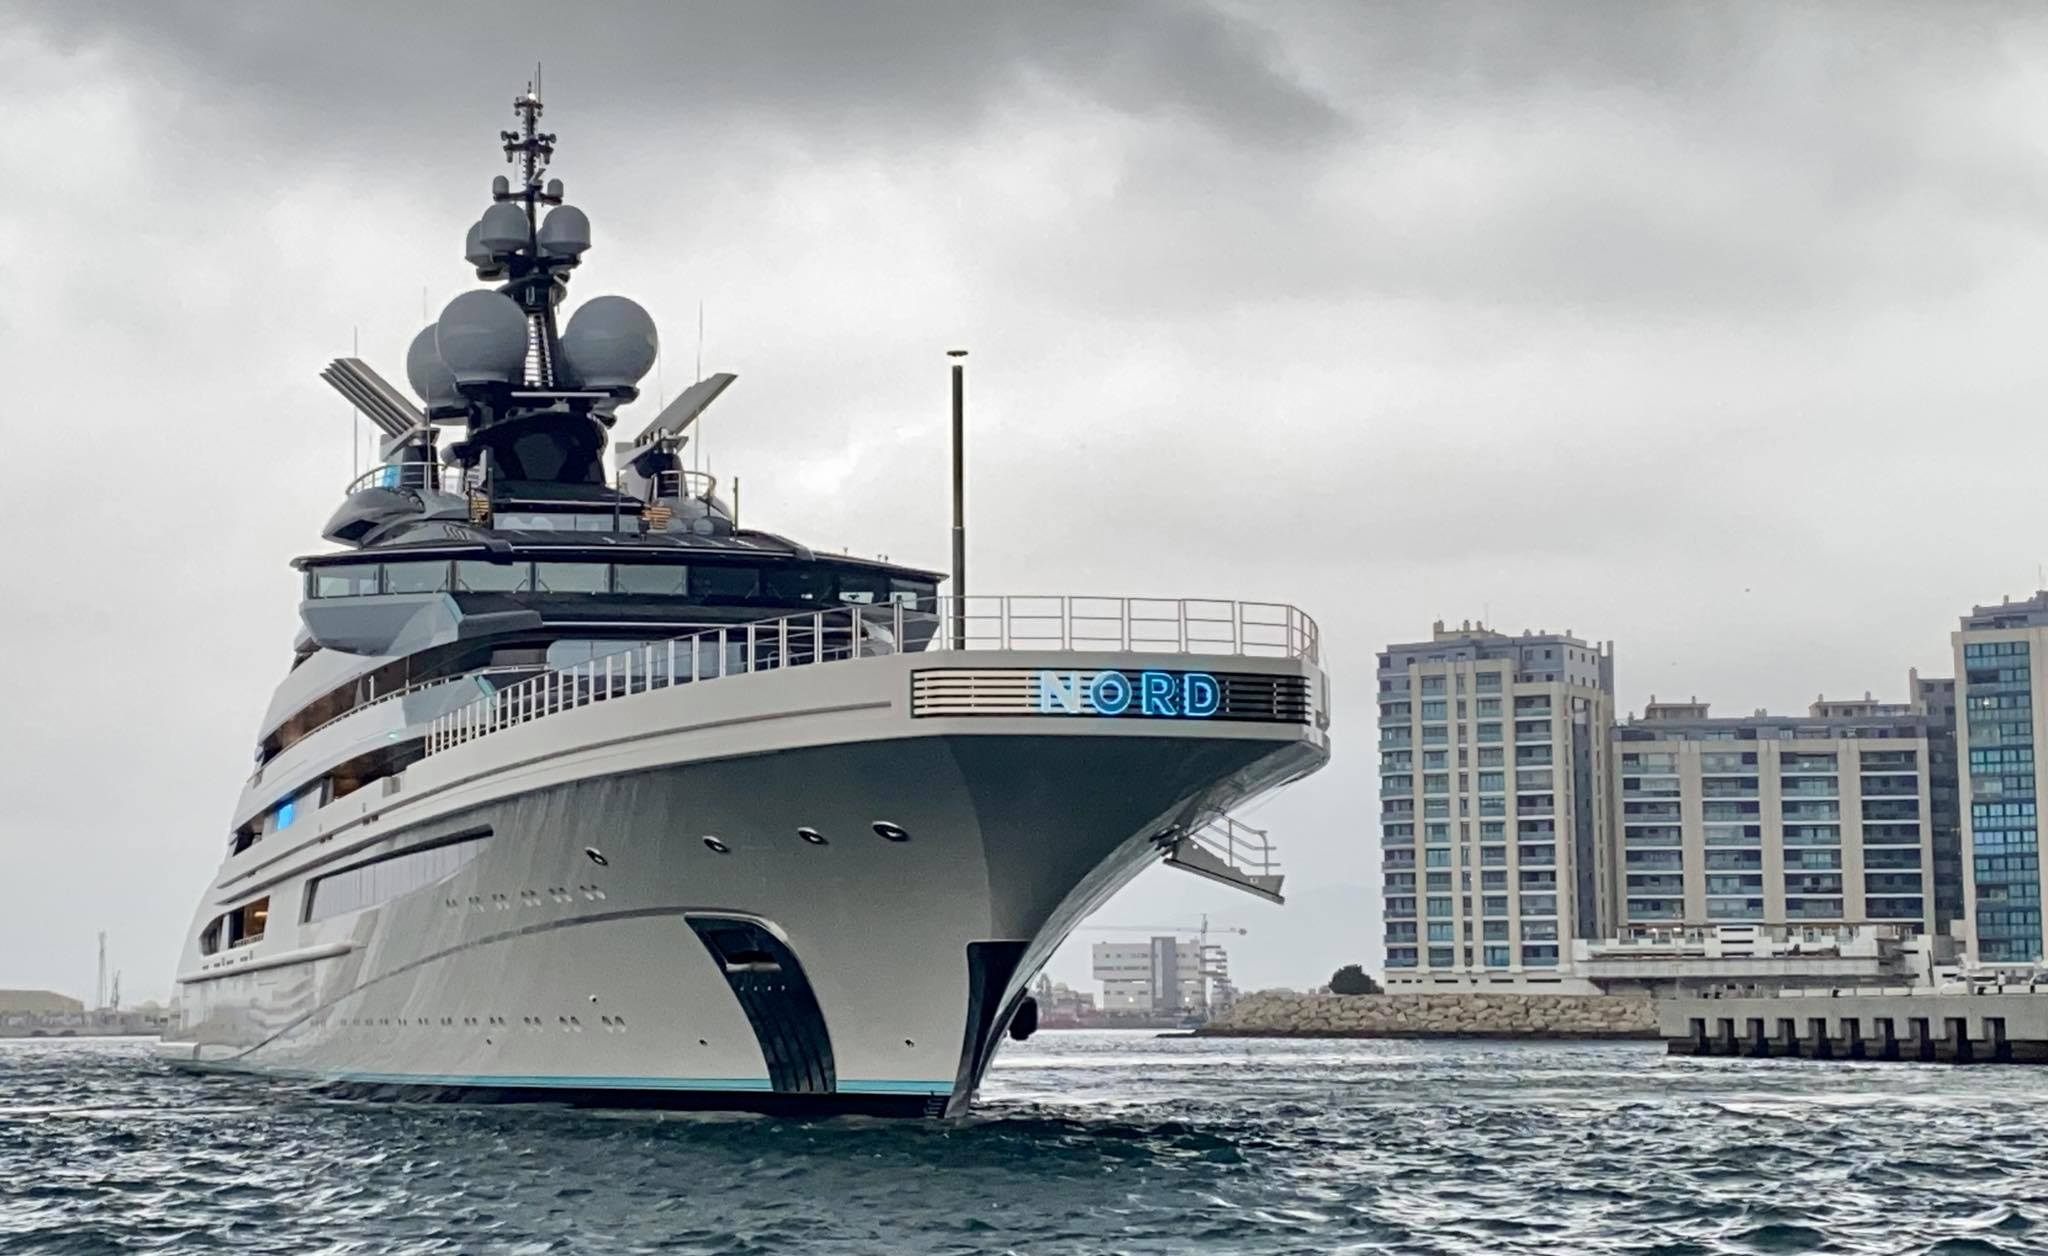 More Amazing Photos of the yacht Nord in Gibraltar